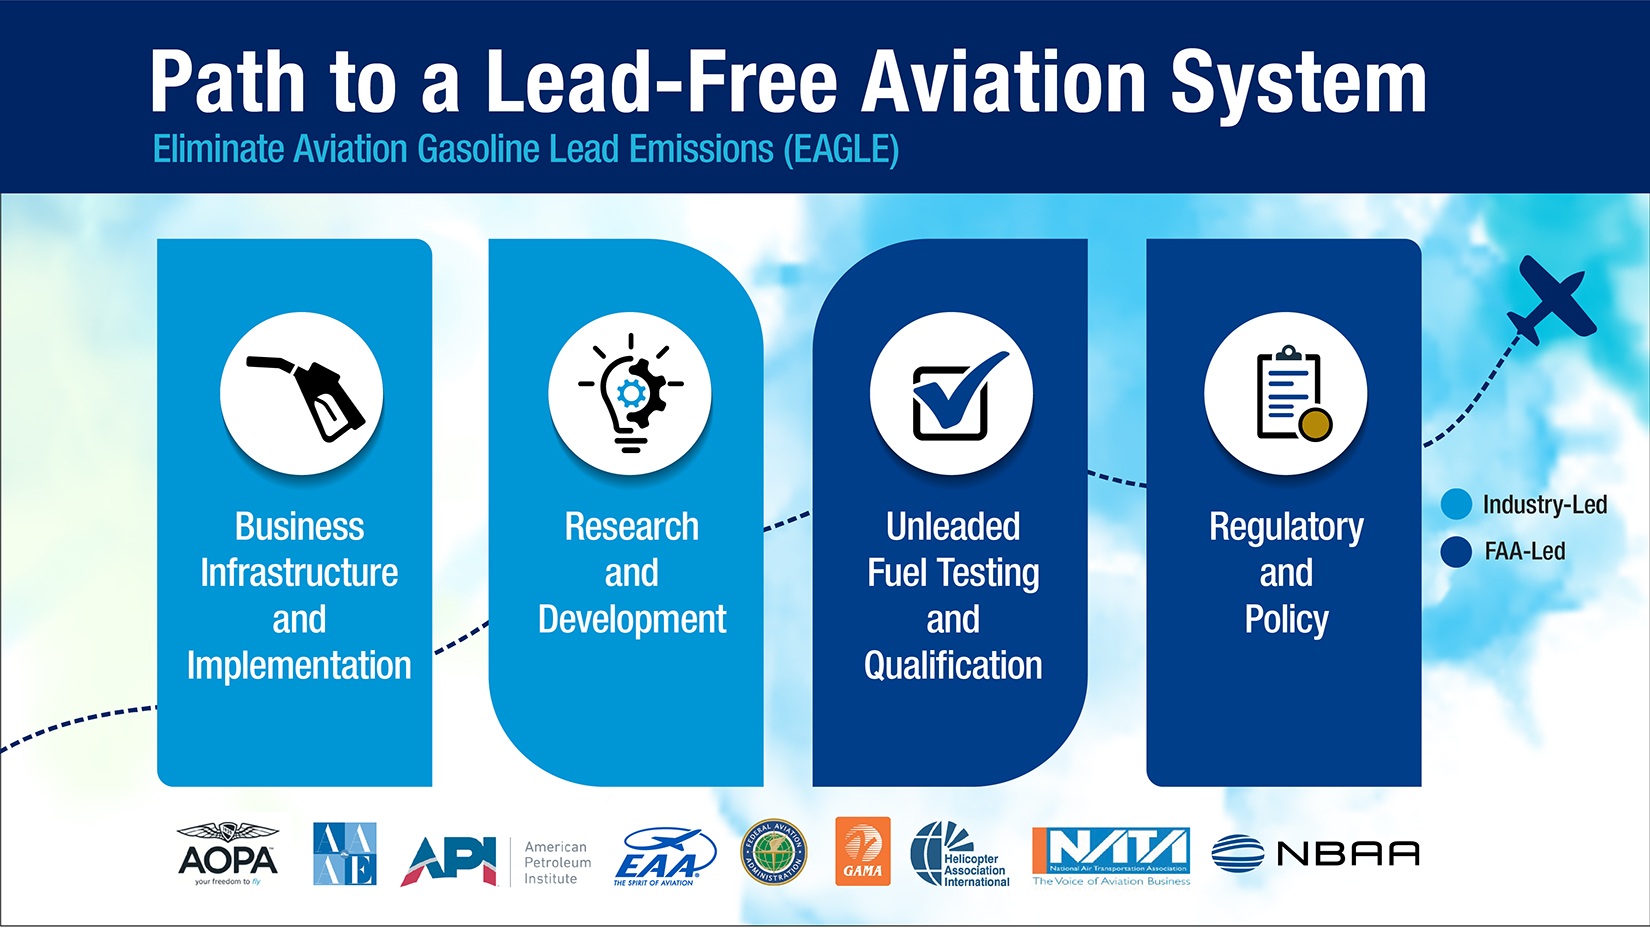 Path to Lead-Free Aviation System